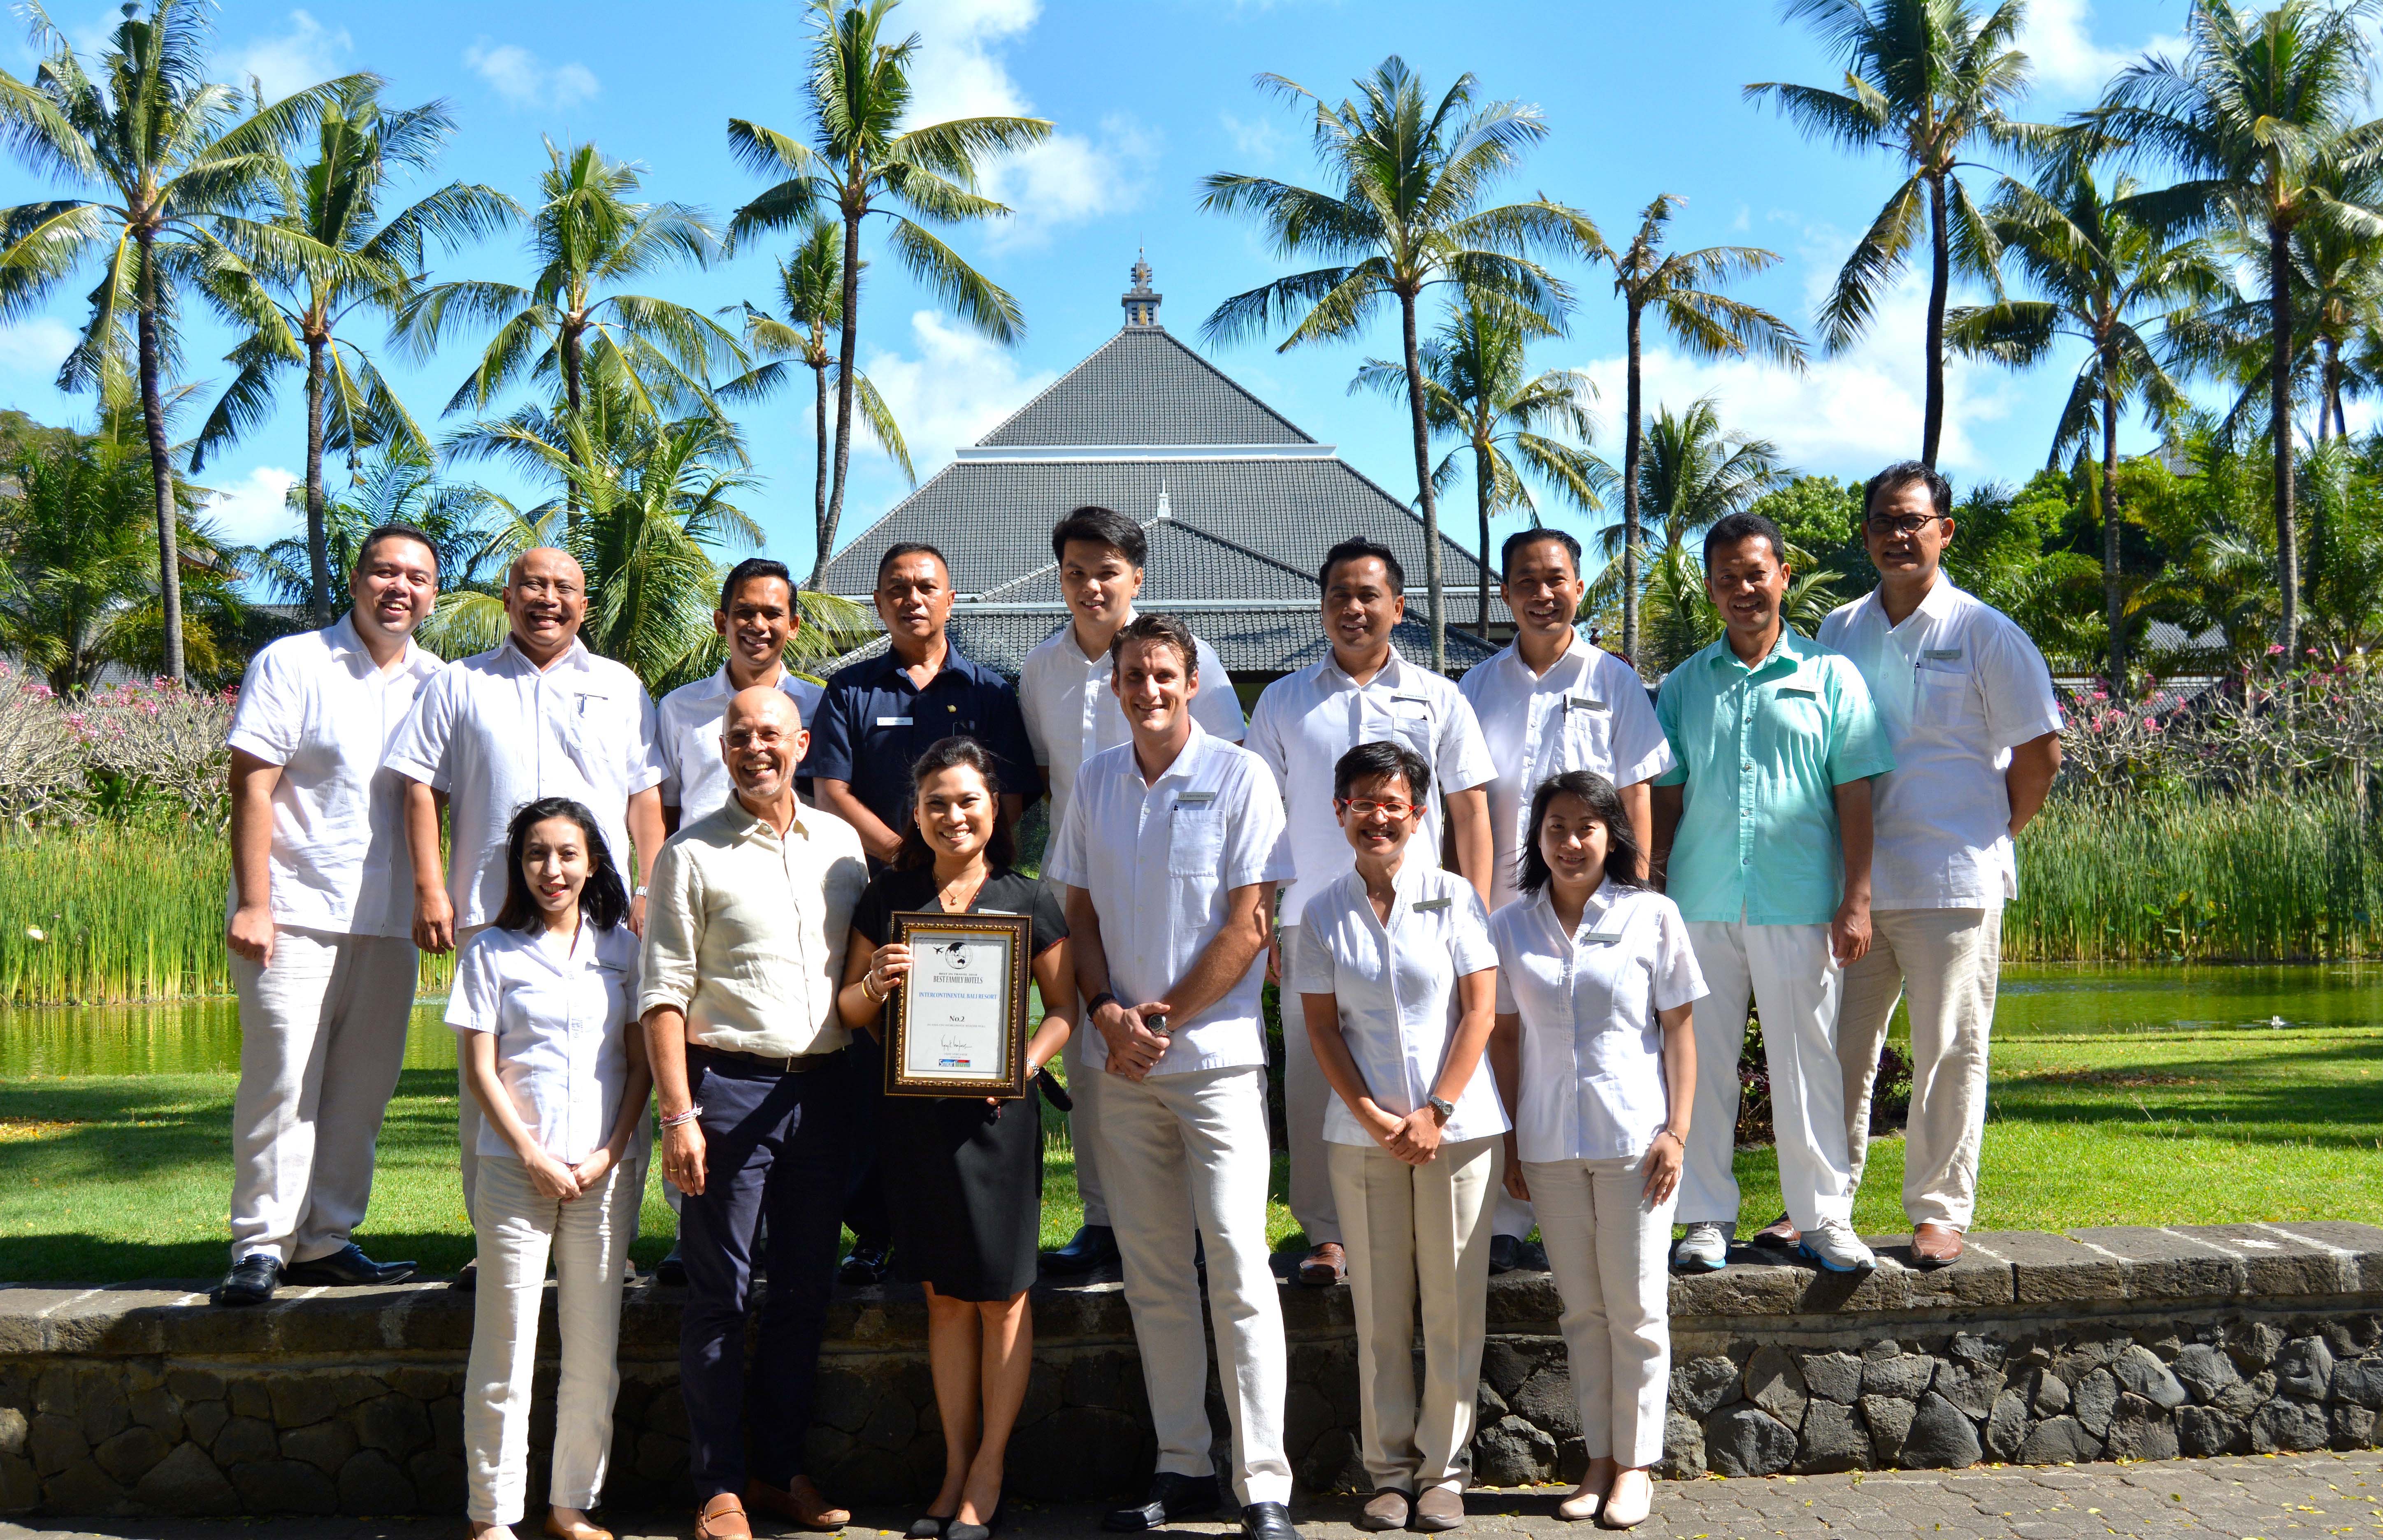 INTERCONTINENTAL BALI RESORT RANKED NUMBER 2 AS FAMILY HOTEL IN ASIA